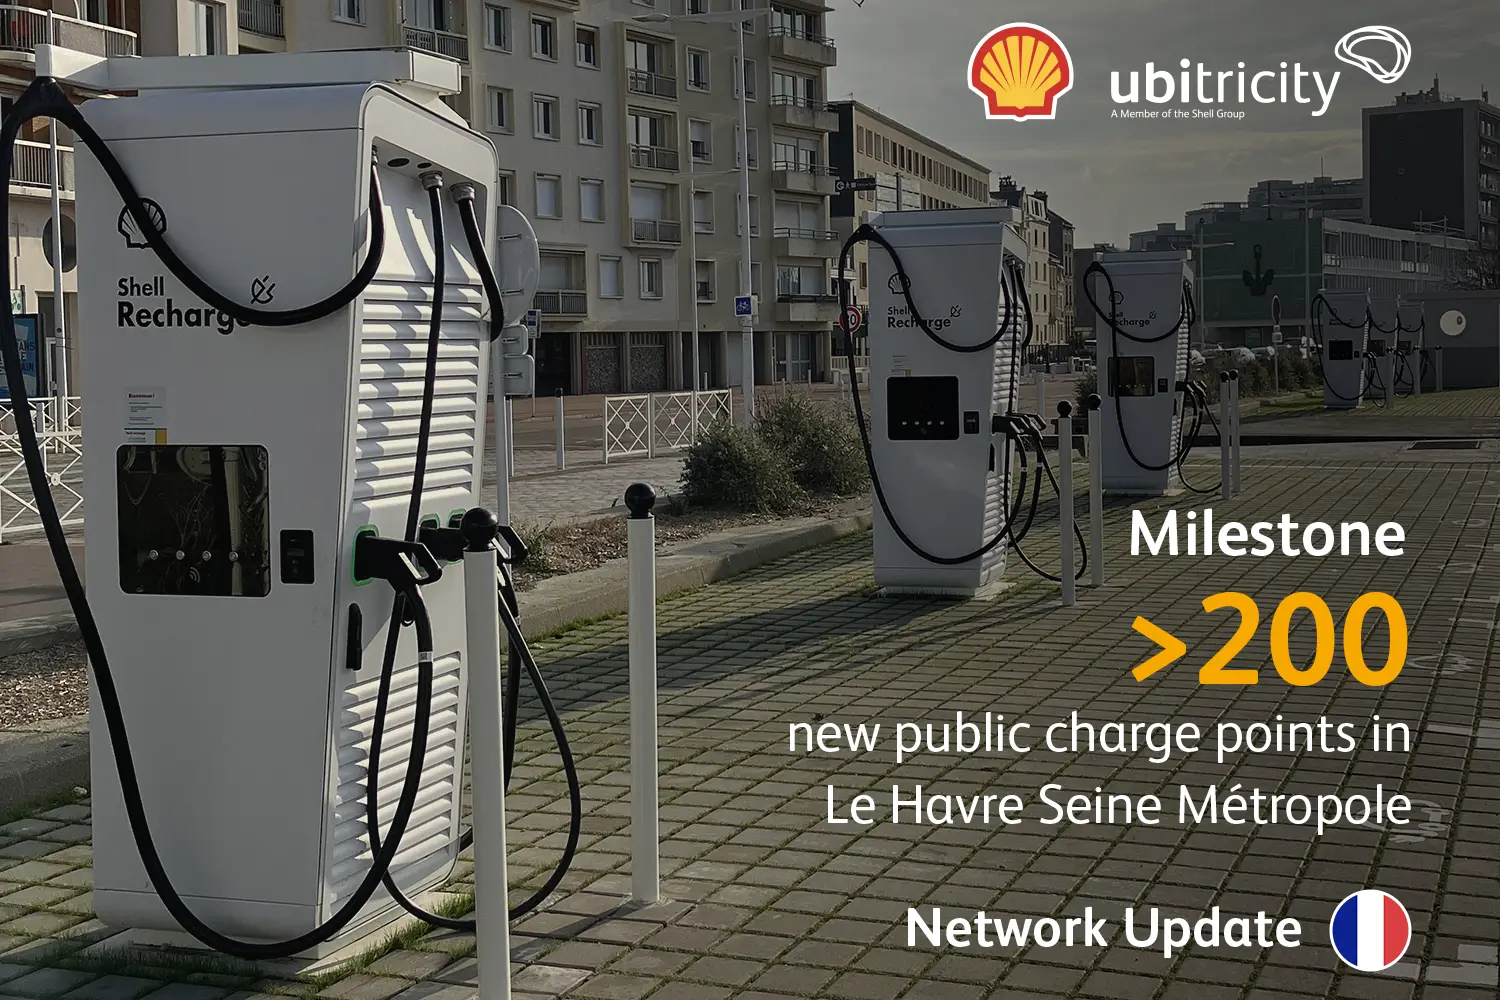 Parking lot in Le Havre, France, with six Shell Recharge DC rapid charging stations for EV charging and a copy over image reading "Milestone - >200 new public charge points in Le Havre Seine Métropole".